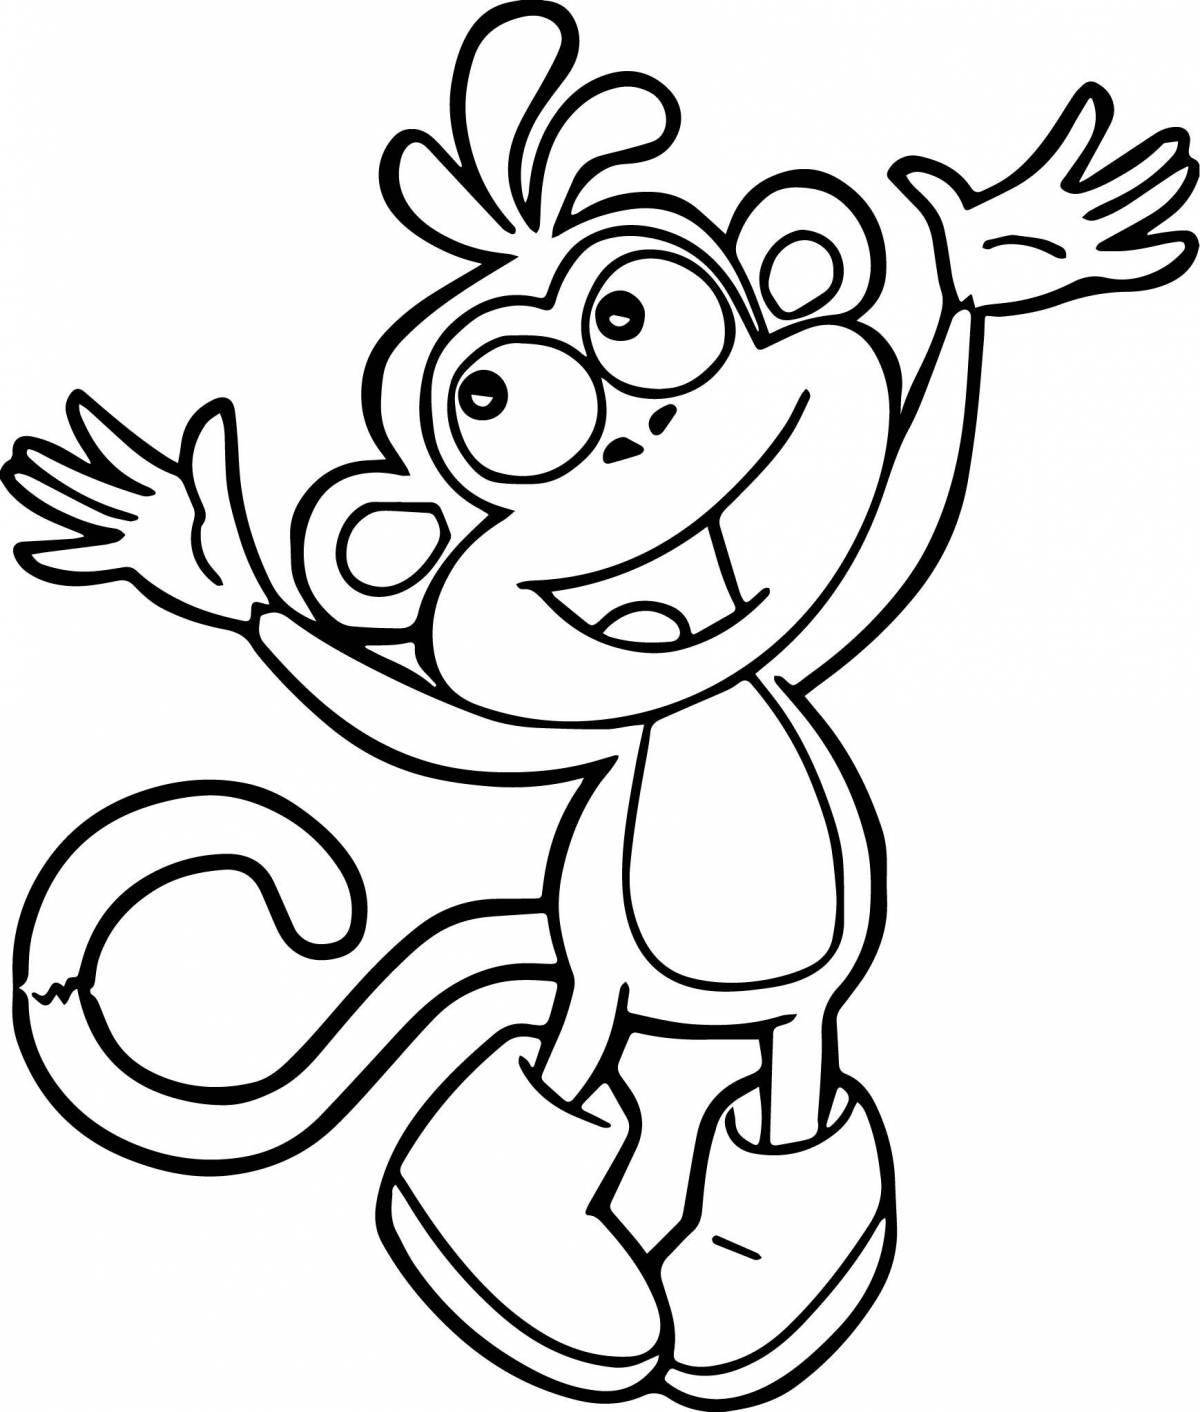 Colorful monkey coloring book for kids